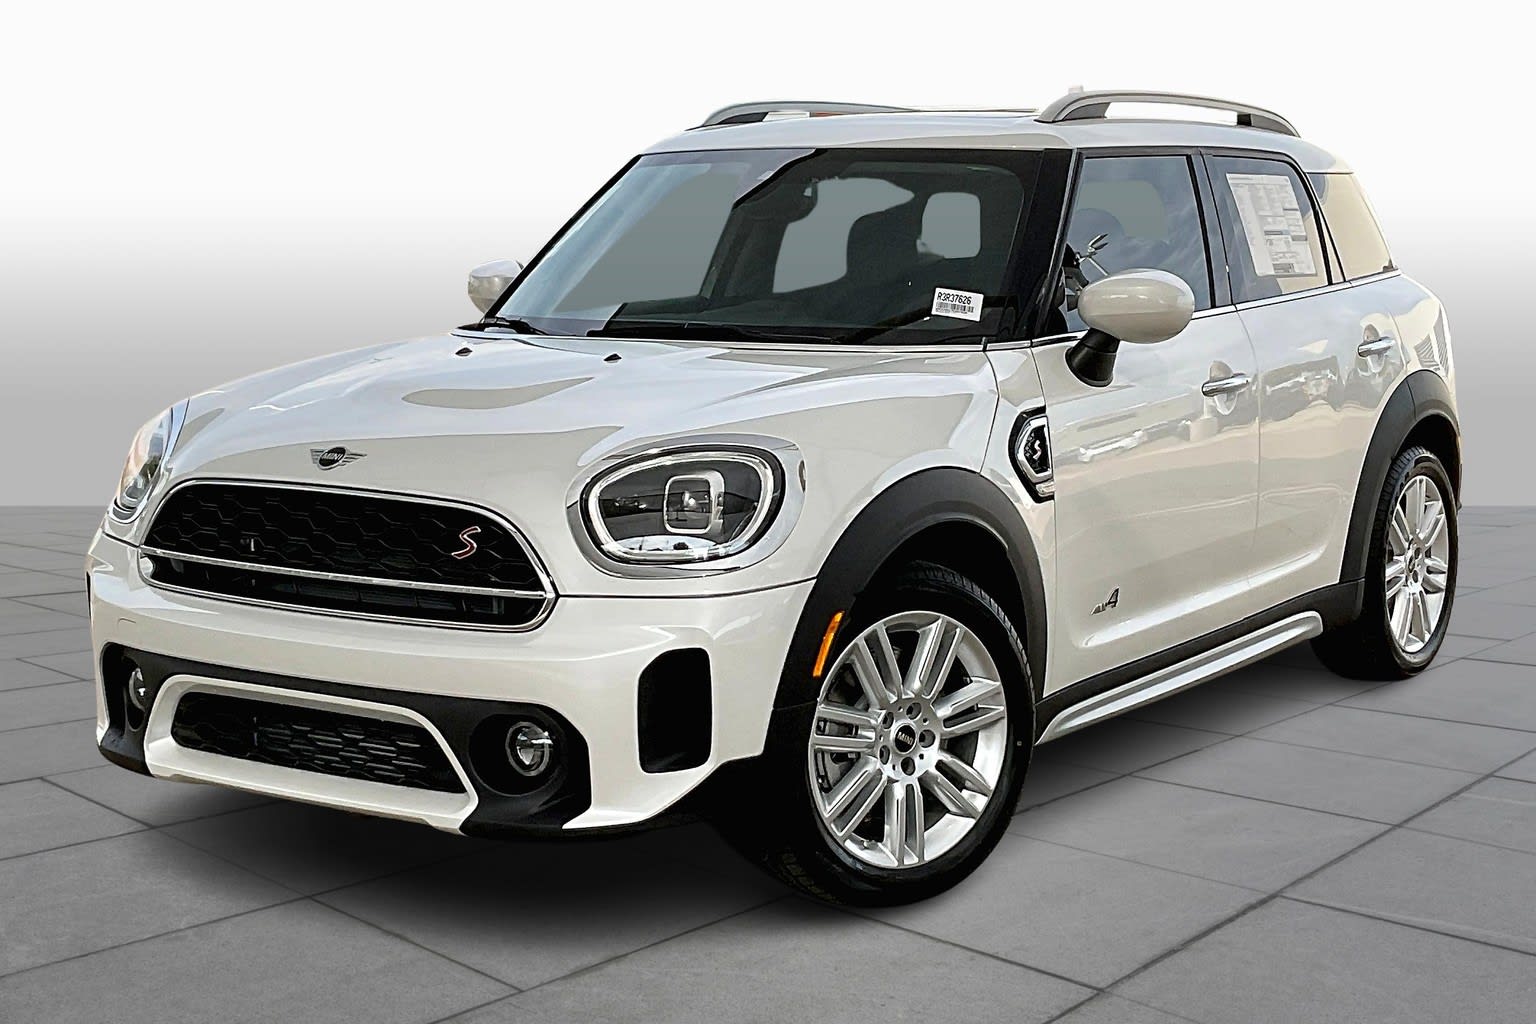 2014 MINI Cooper Countryman AWD hatchback for sale in Colorado